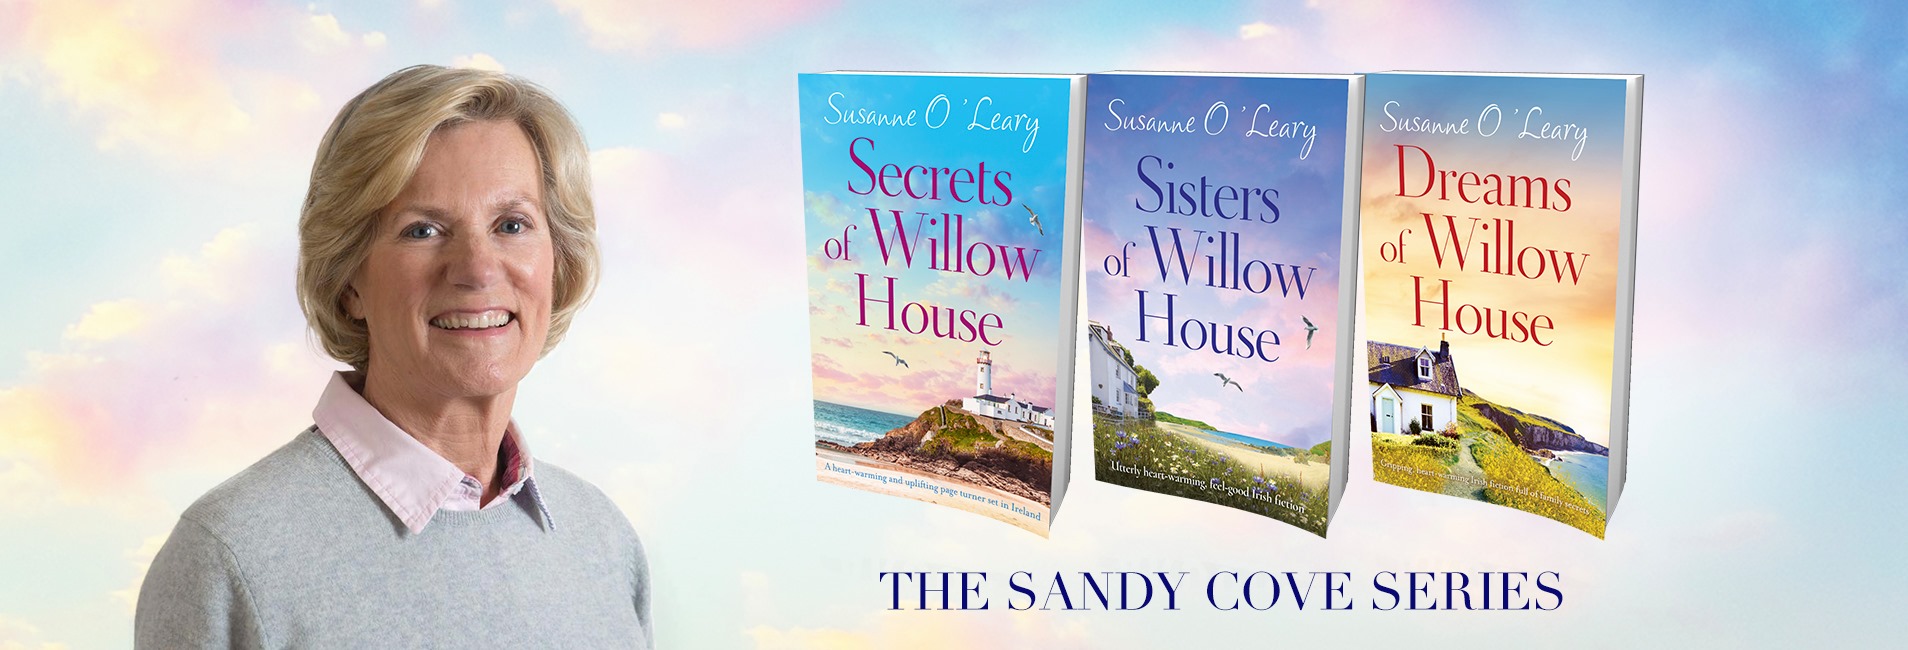 The Sandy Cove Series By Susanne O'Leary